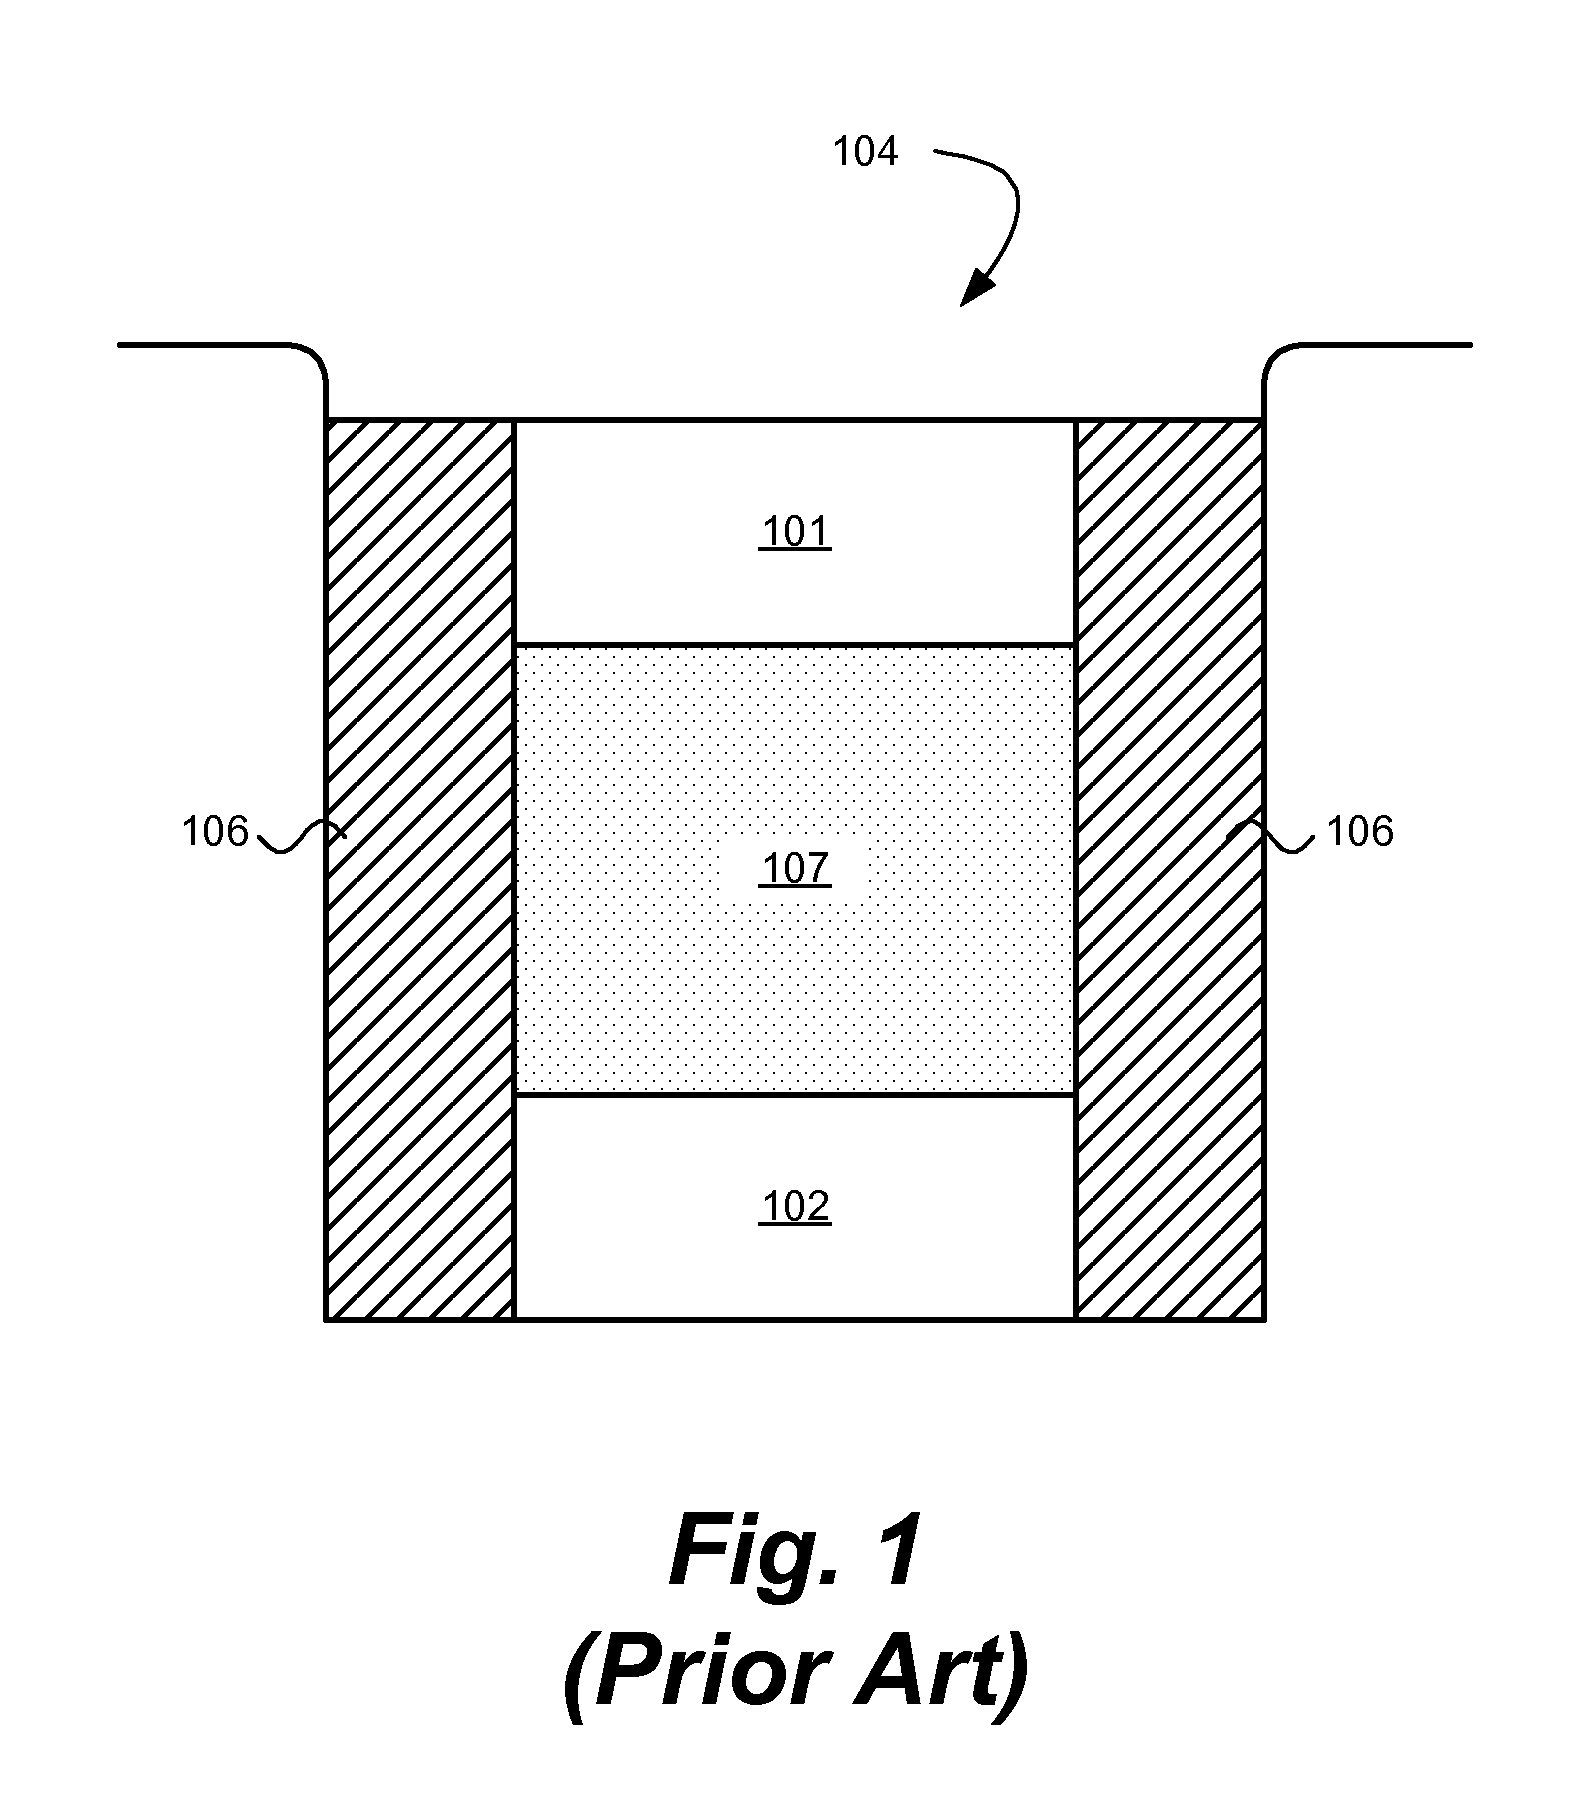 Self-aligned in-contact phase change memory device